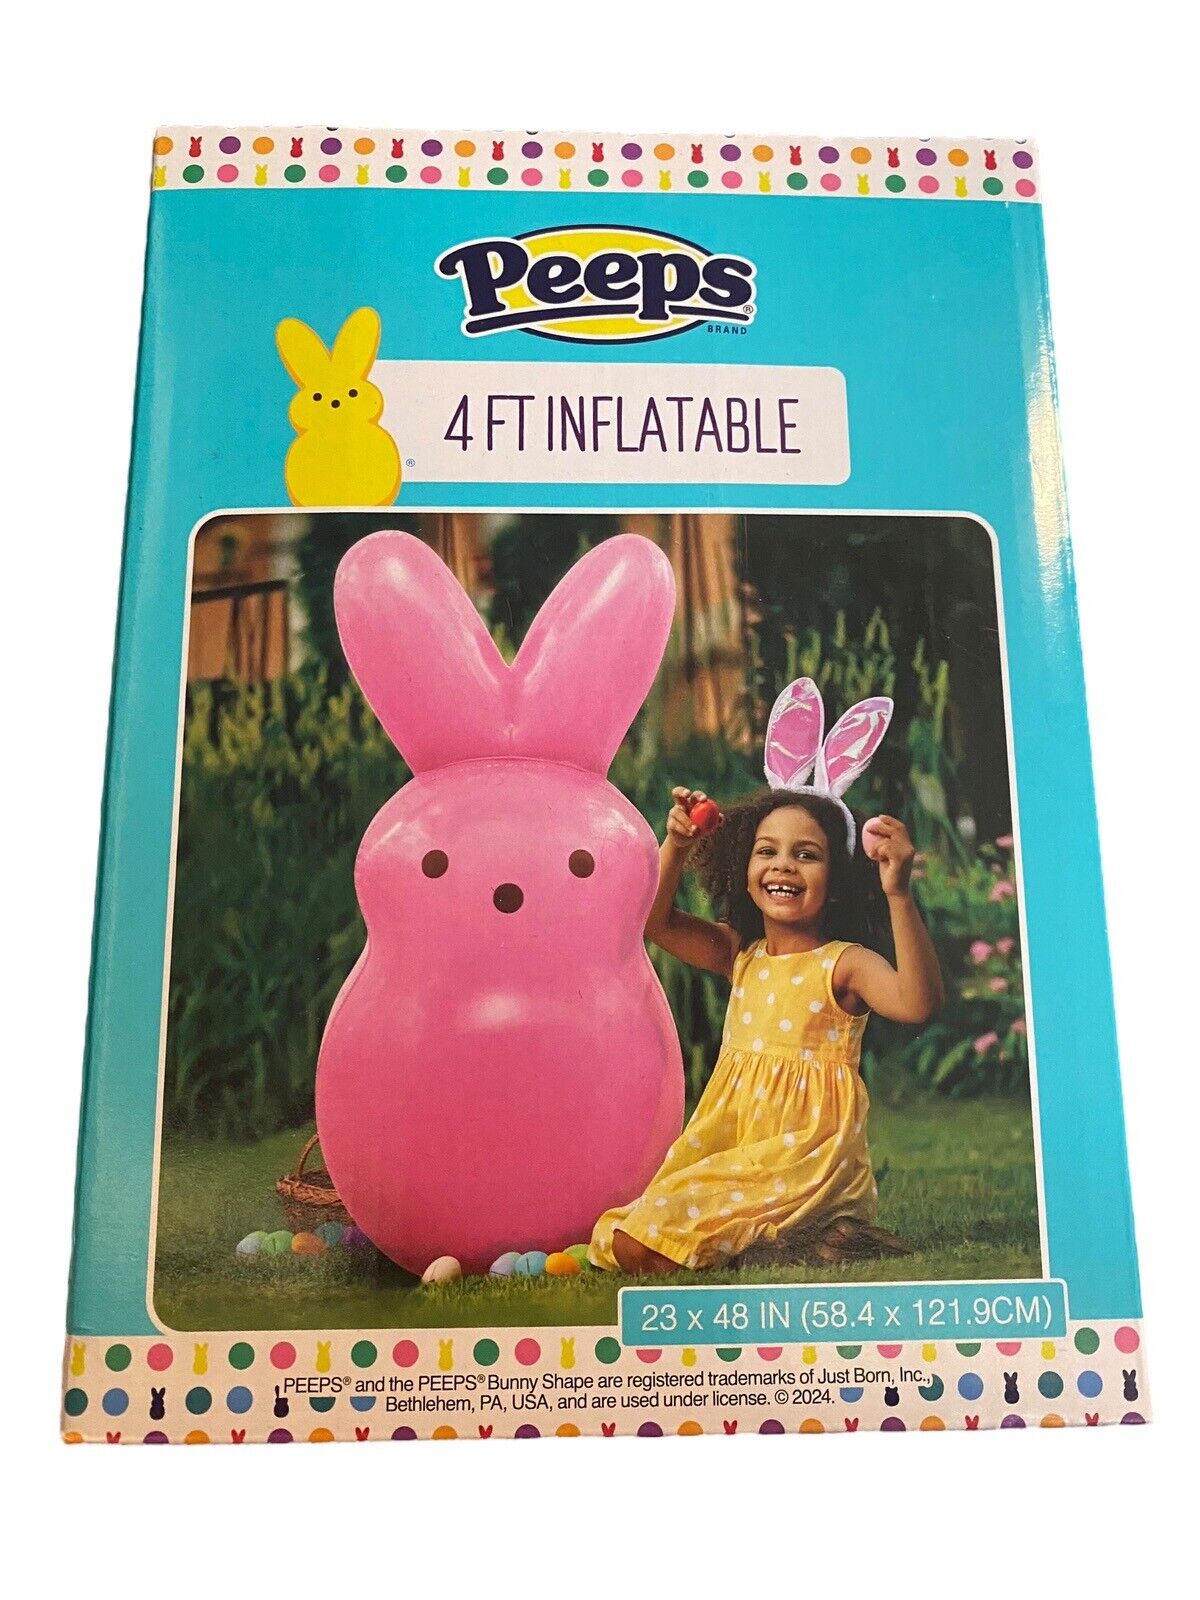 PEEPS Pink Bunny Inflatable 4\' Tall Easter Holiday Home Decor Inside & Outside